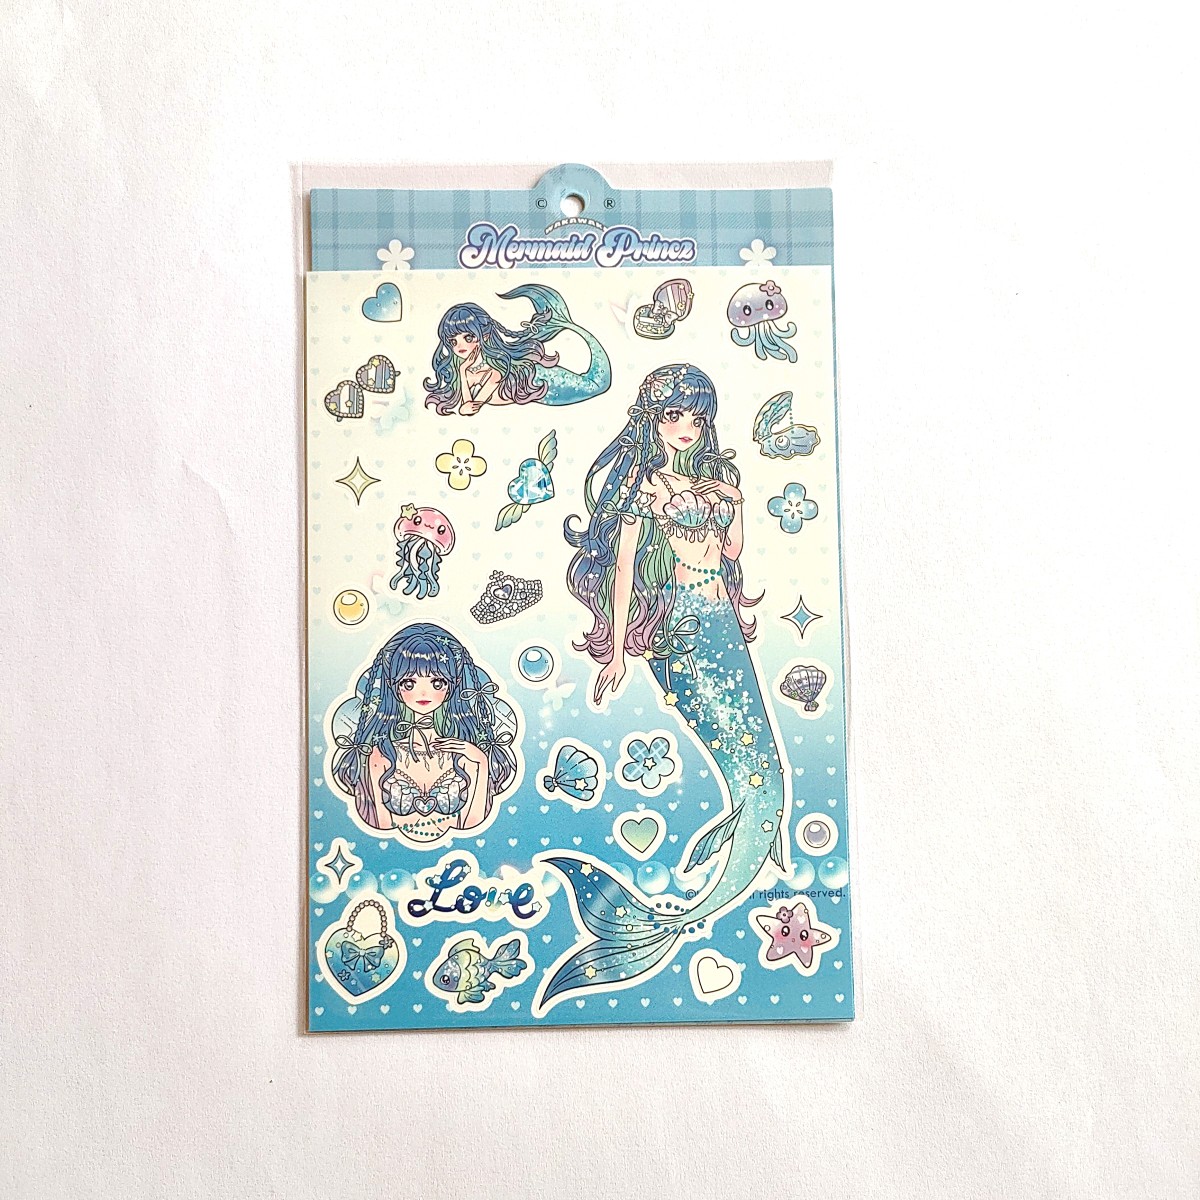 Buy Mermaid DIY Journal Kit for Girls Scrapbooking and Diary Supplies  Stickers Set - MyDeal